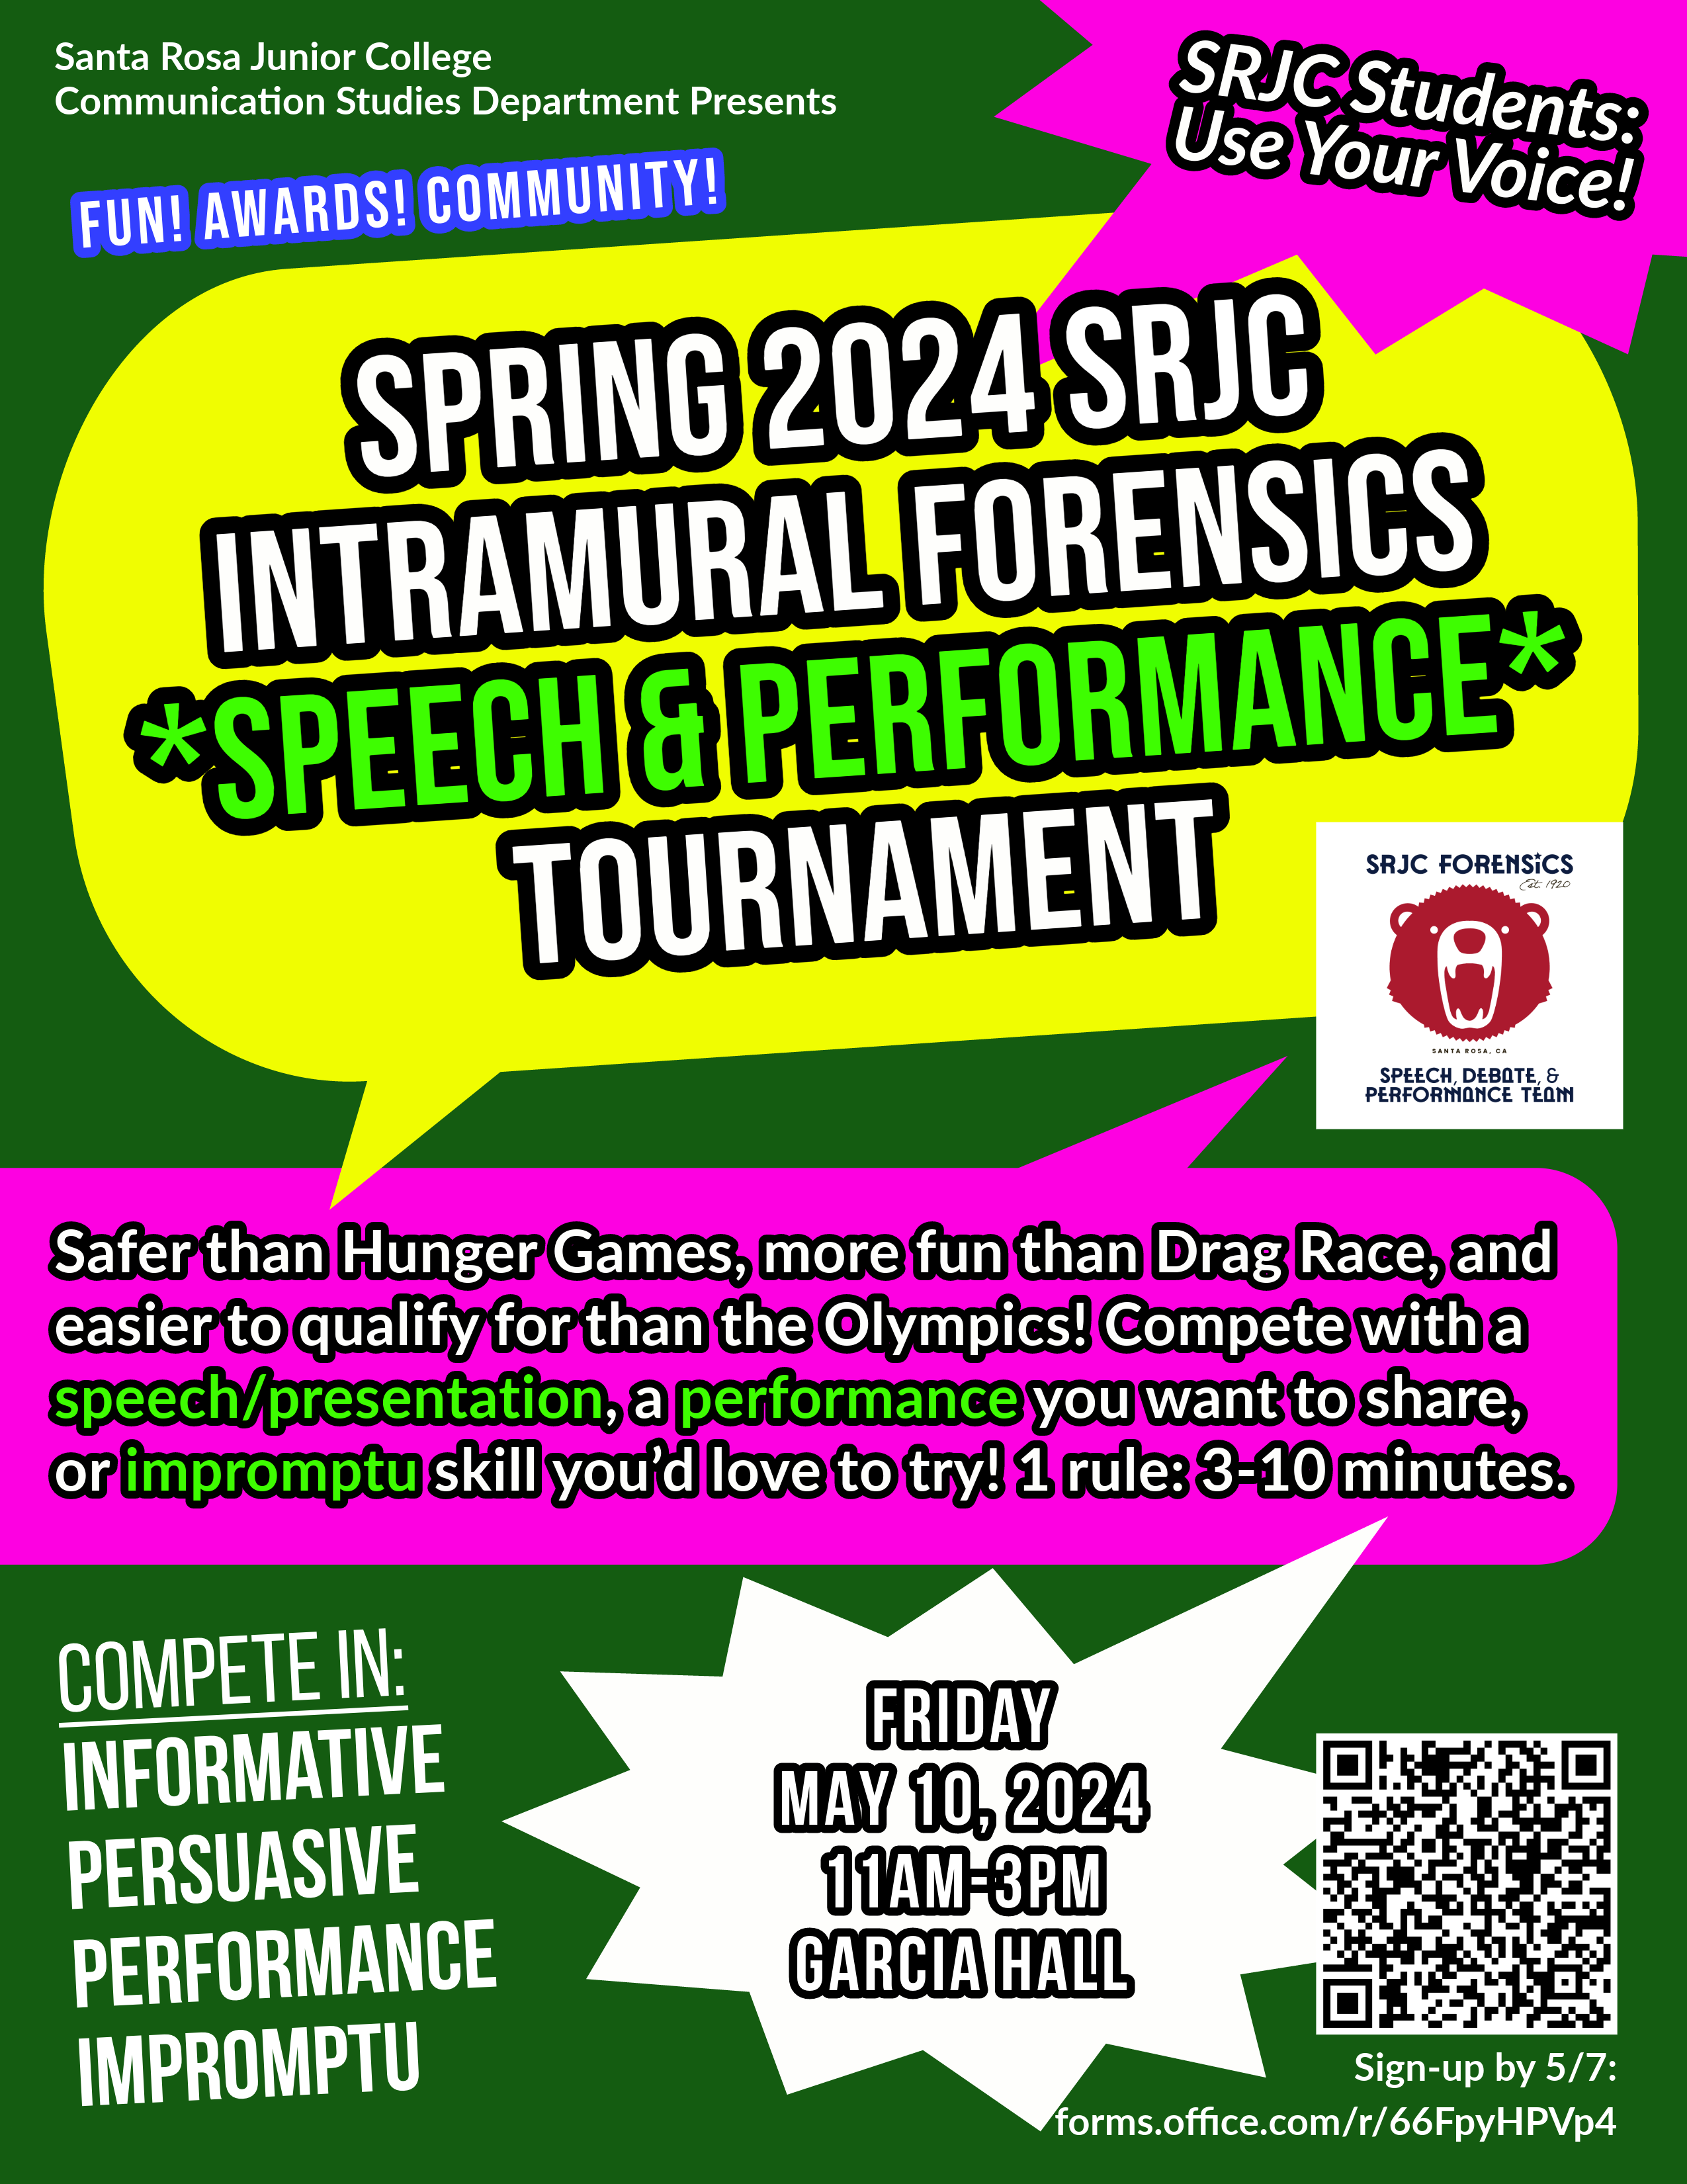 COMPETE FOR AWARDS at the INTRAMURAL SPEECH & PERFORMANCE TOURNAMENT: Fri 5/10 11-3Hi SRJC!  The annual spring SRJC Forensics Intramural Speech and Performance Tournament is Friday 5/10 from 11-3 in Garcia Hall, and we're looking for student speeches, presentations, and performances to compete to win some awards! And more students from any major to use their voice!   Encourage students to sign up—the only rules are 3-10 minutes and they can present:- Informative or persuasive speeches or presentations,   - Performances like poetry, monologues, storytelling, comedy, and scenes,   - or Impromptu speeches on topics like famous quotes, would you rather…, and SRJC pride!COMPETE WITH YOU SPEECH OR PERFORMANCE  -Student sign-up form (by 5/2/2024): https://forms.office.com/r/66FpyHPVp4  -Website with info and student testimonials: https://comm-studies.santarosa.edu/intramural-forensics-tournament  -Information video with Director Dr. Josh Hamzehee: https://www.youtube.com/watch?v=_sh4YGl6NK8  STUDENTS FROM ALL MAJORS & DEPARTMENTS  You are invited to Santa Rosa Junior College’s Fall 2024 Intramural Forensics Speech and Performance Tournament on Friday May 10, 2024 from 11am-3pm in Garcia Hall! The tournament is open to all SRJC students. If you’re looking for ways to build your public speaking skills, your resumé, or your transfer application, this tournament experience is for you!Safer than Hunger Games, more fun than Drag Race, and easier to qualify for than the Olympics; this intramural speech competition is a great way to show off your knowledge in a speech or presentation you already have, a performance you want to share, or an impromptu skill you’d love to try. All in a supportive environment.. with fun, awards, and community! ... If students love it and would like to receive transferable units for participation in the future, opportunities to travel to competitions for free, and to join the national award-winning SRJC Forensics Speech, Debate, and Performance Team, register for Comm 52A (1-3 units) for next semest